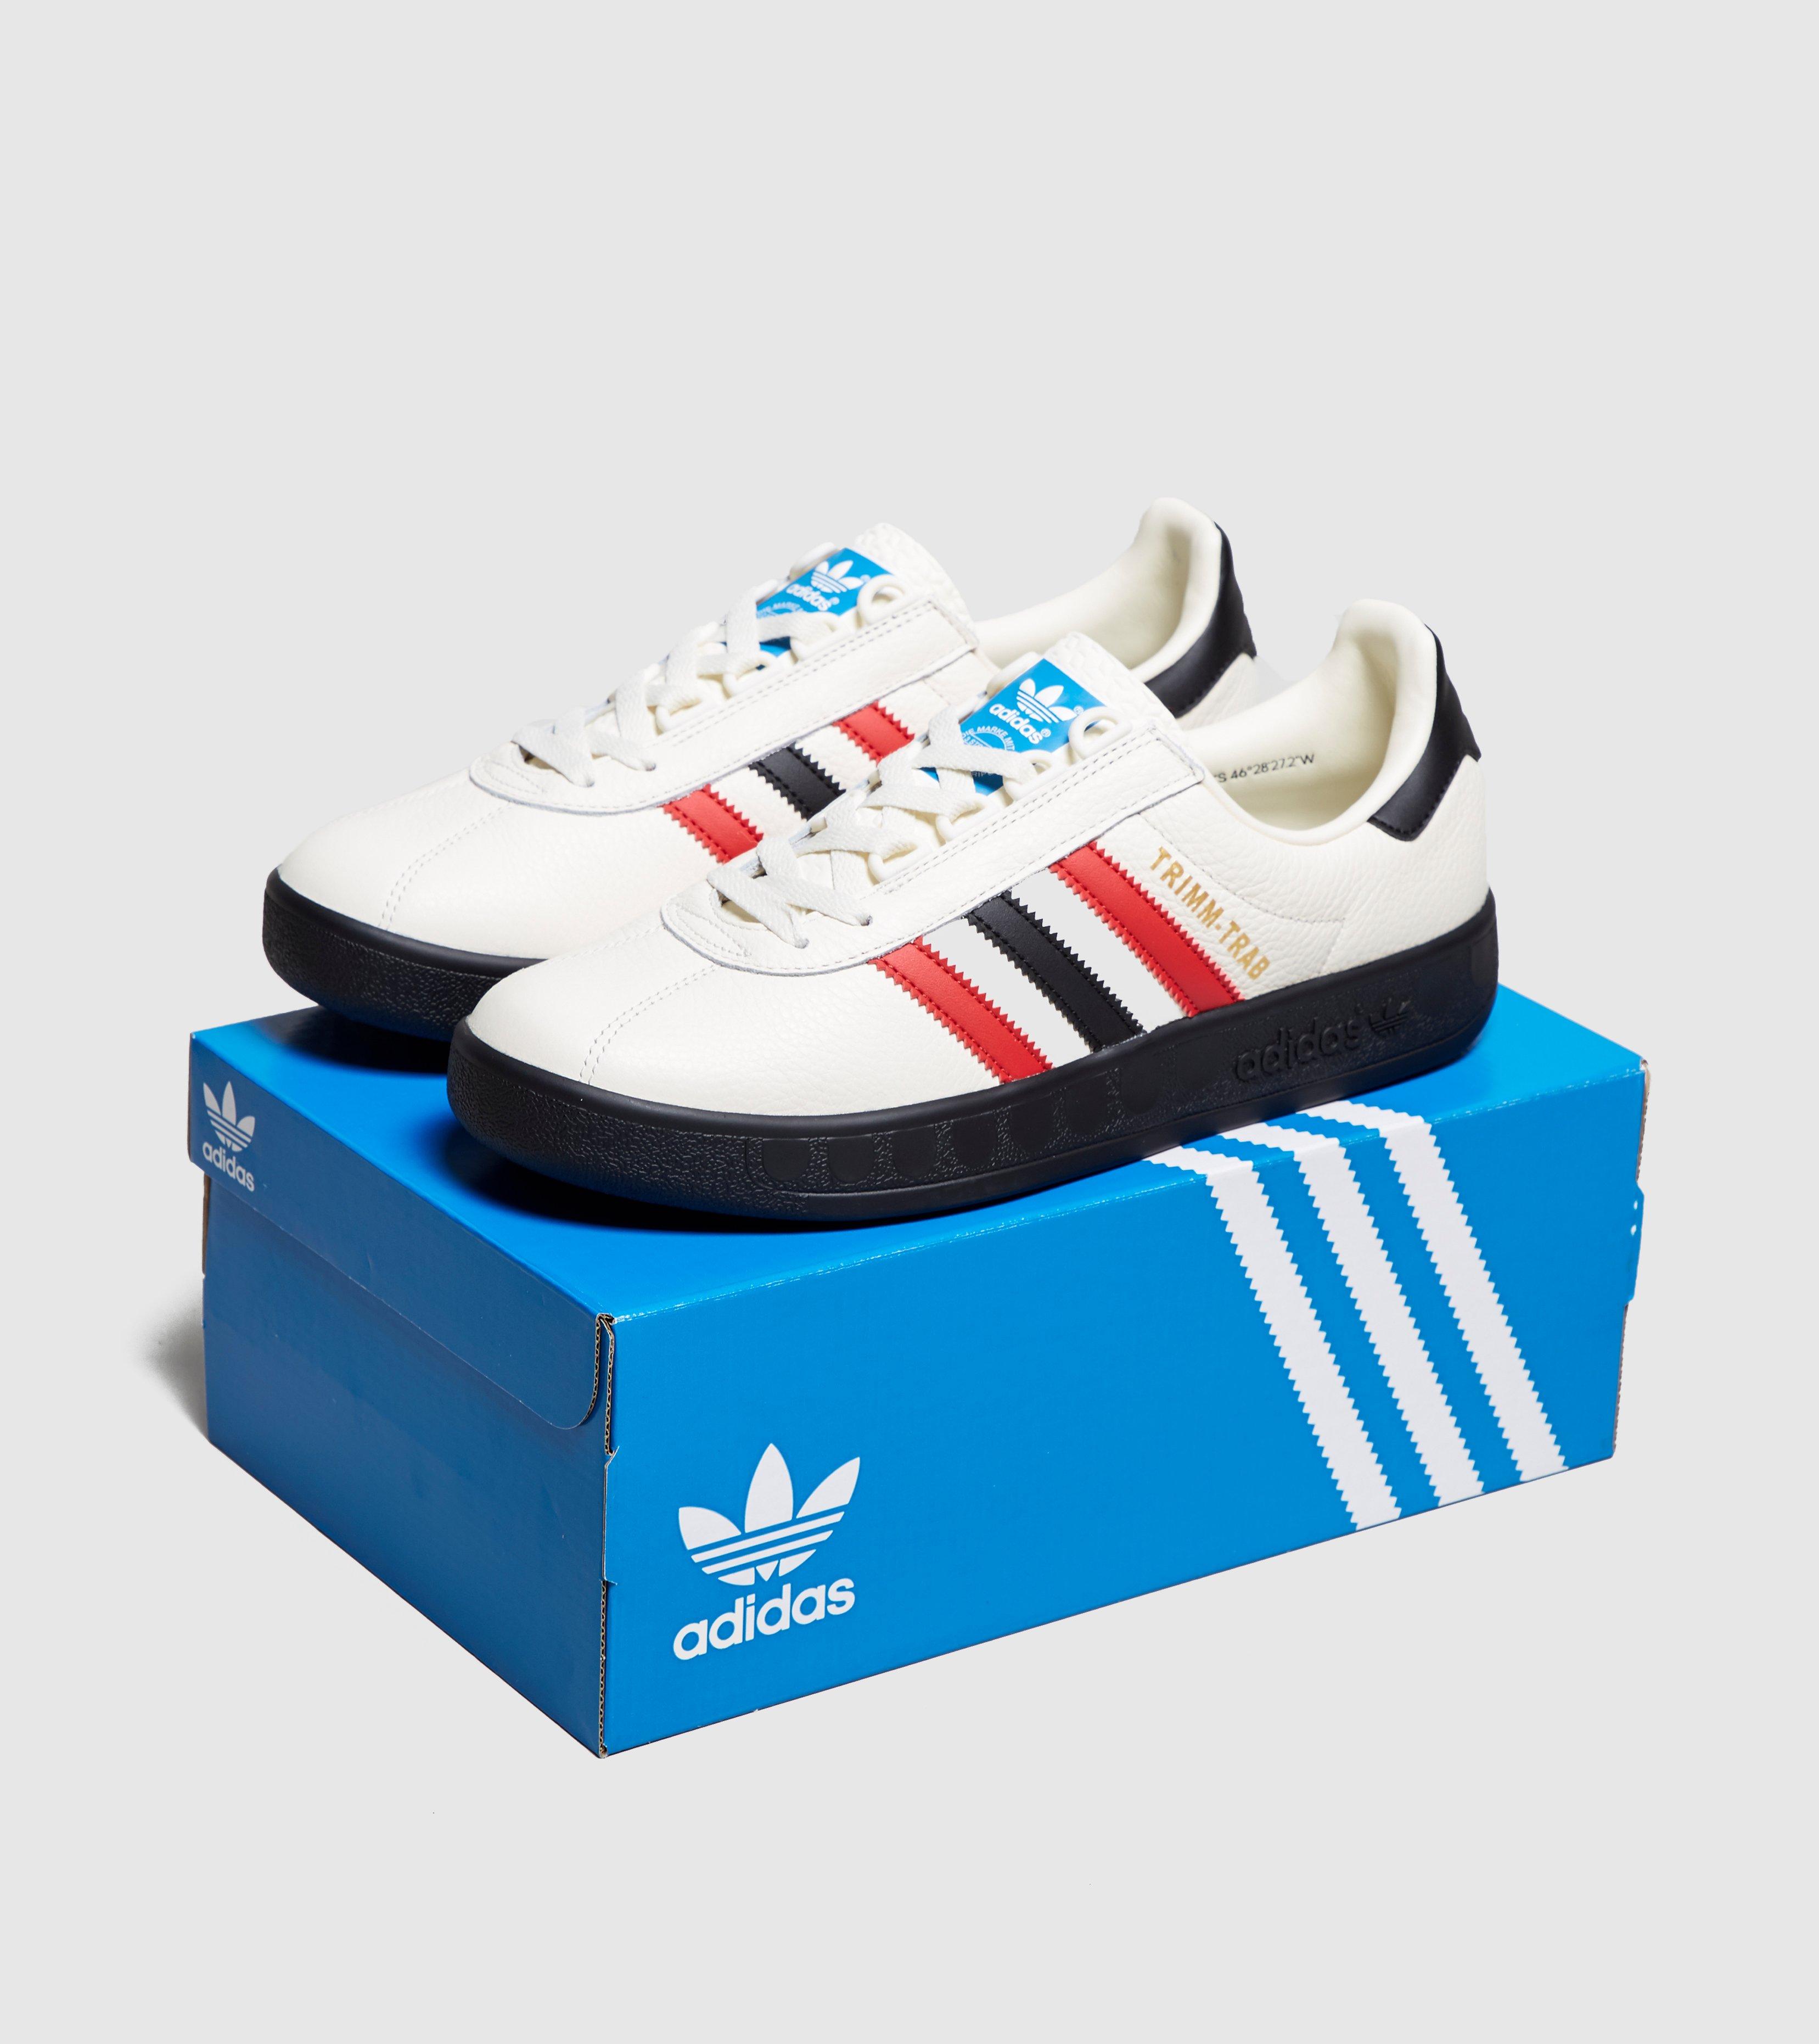 adidas trimm trab rivalry pack